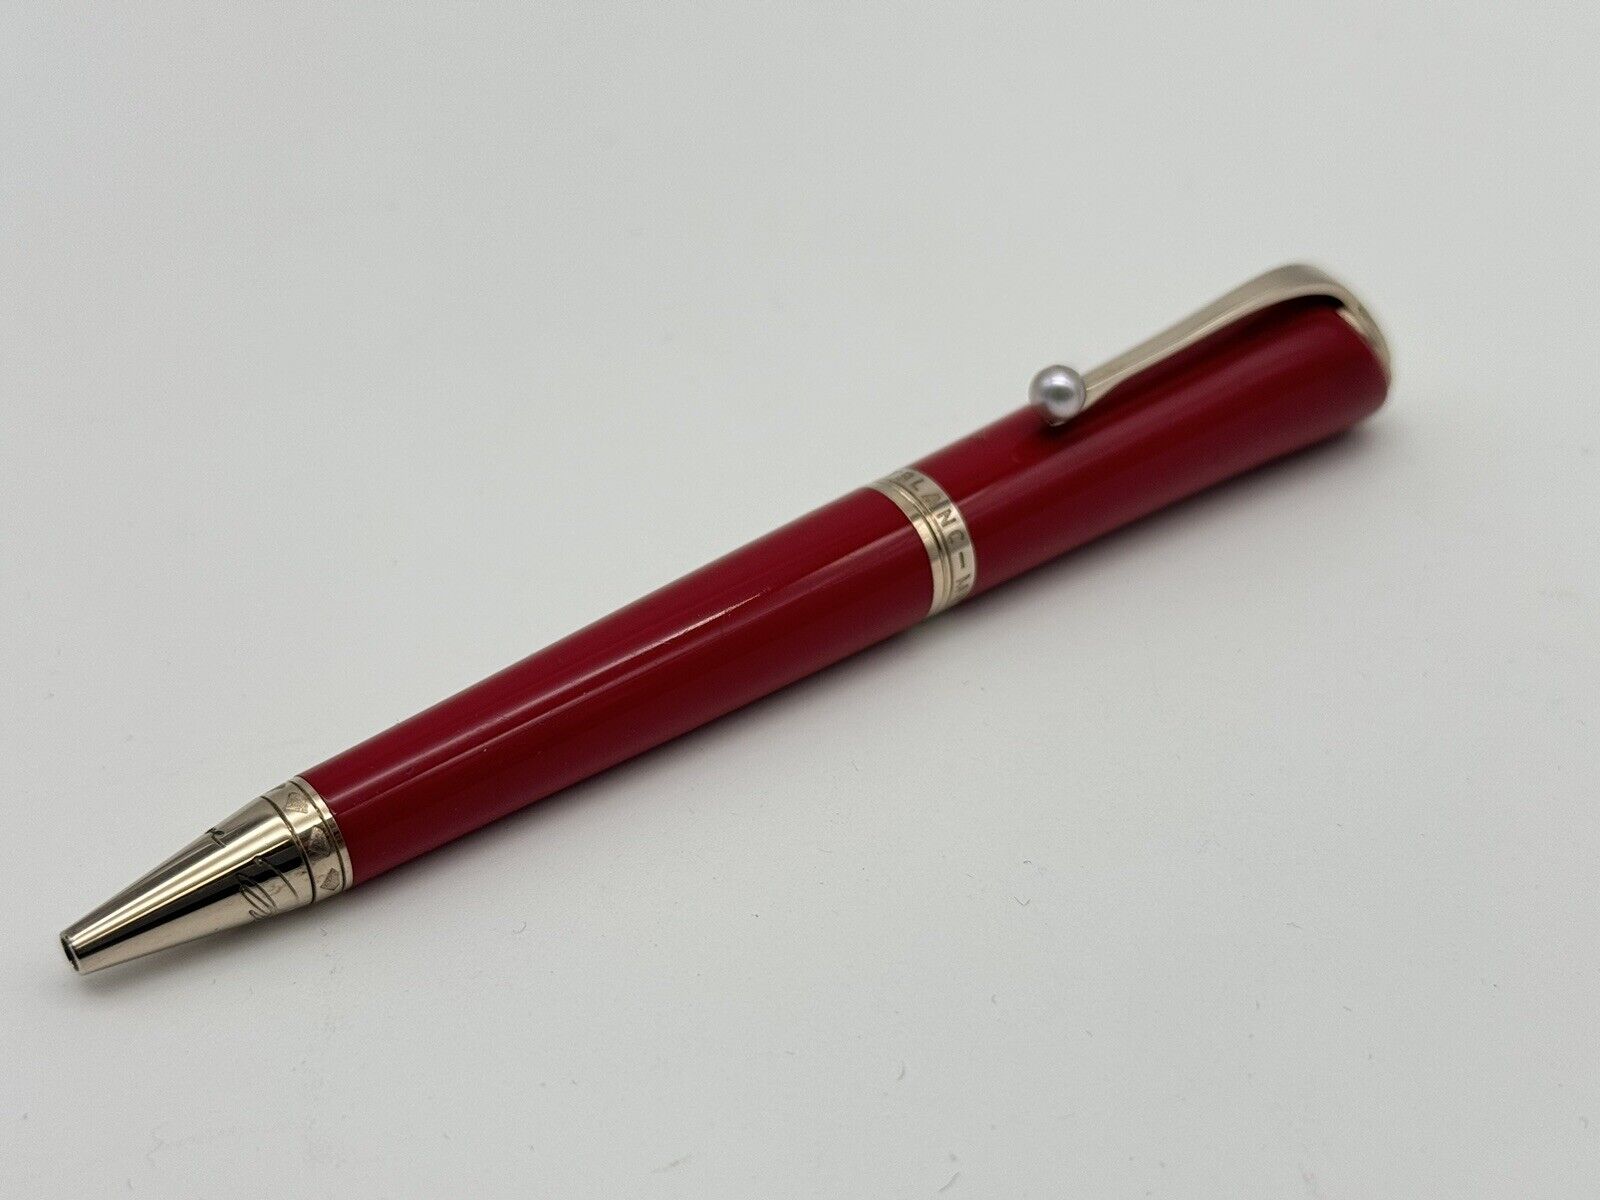 MONTBLANC MARILYN MONROE SPECIAL EDITION RED BALLPOINT PEN 100% GENUINE